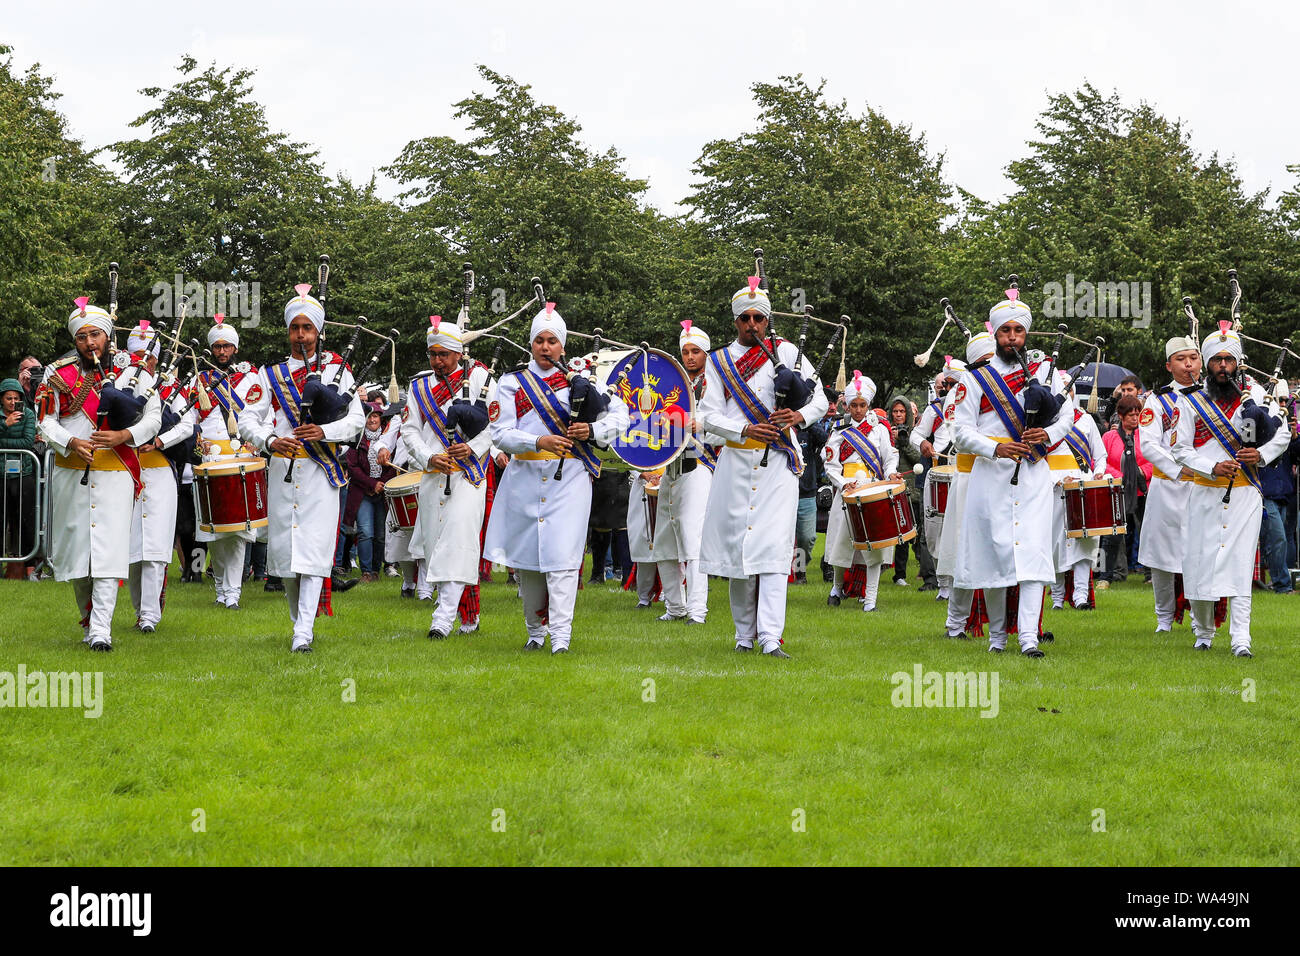 Glasgow, UK. 17th Aug 2019. The very popular and colourful Sri Dasmesh Pipe band from Malaysia had just completed their performances at the World Pipe band Championships at Glasgow Green, Glasgow, Scotland, UK Credit: Findlay/Alamy Live News Stock Photo